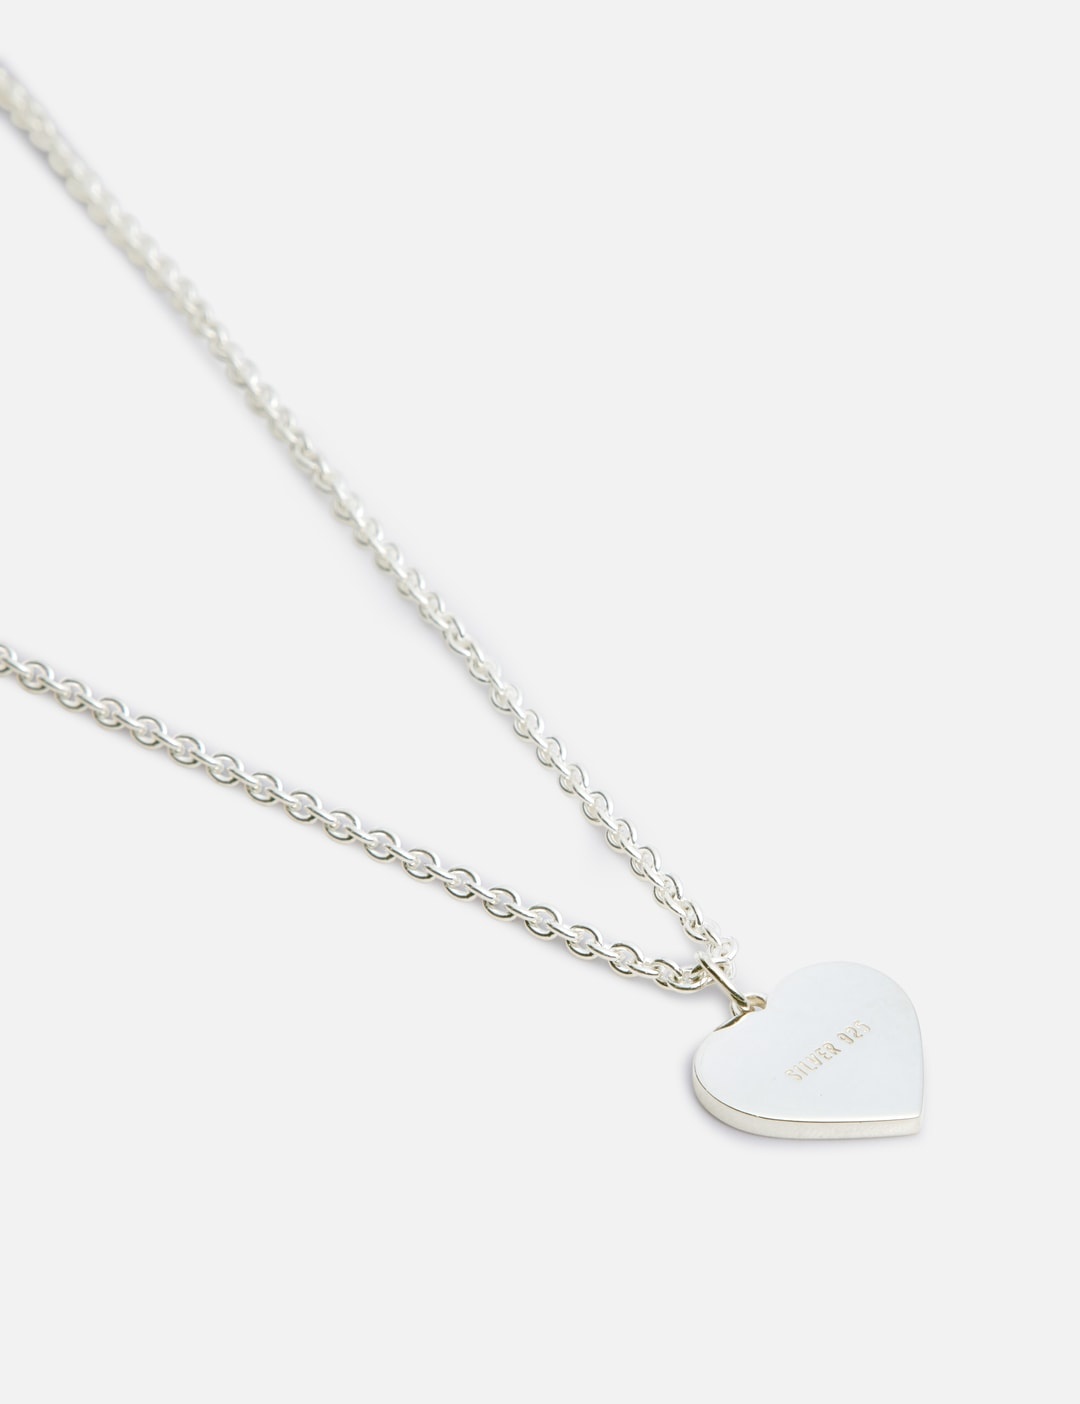 HEART SILVER NECKLACE - 3